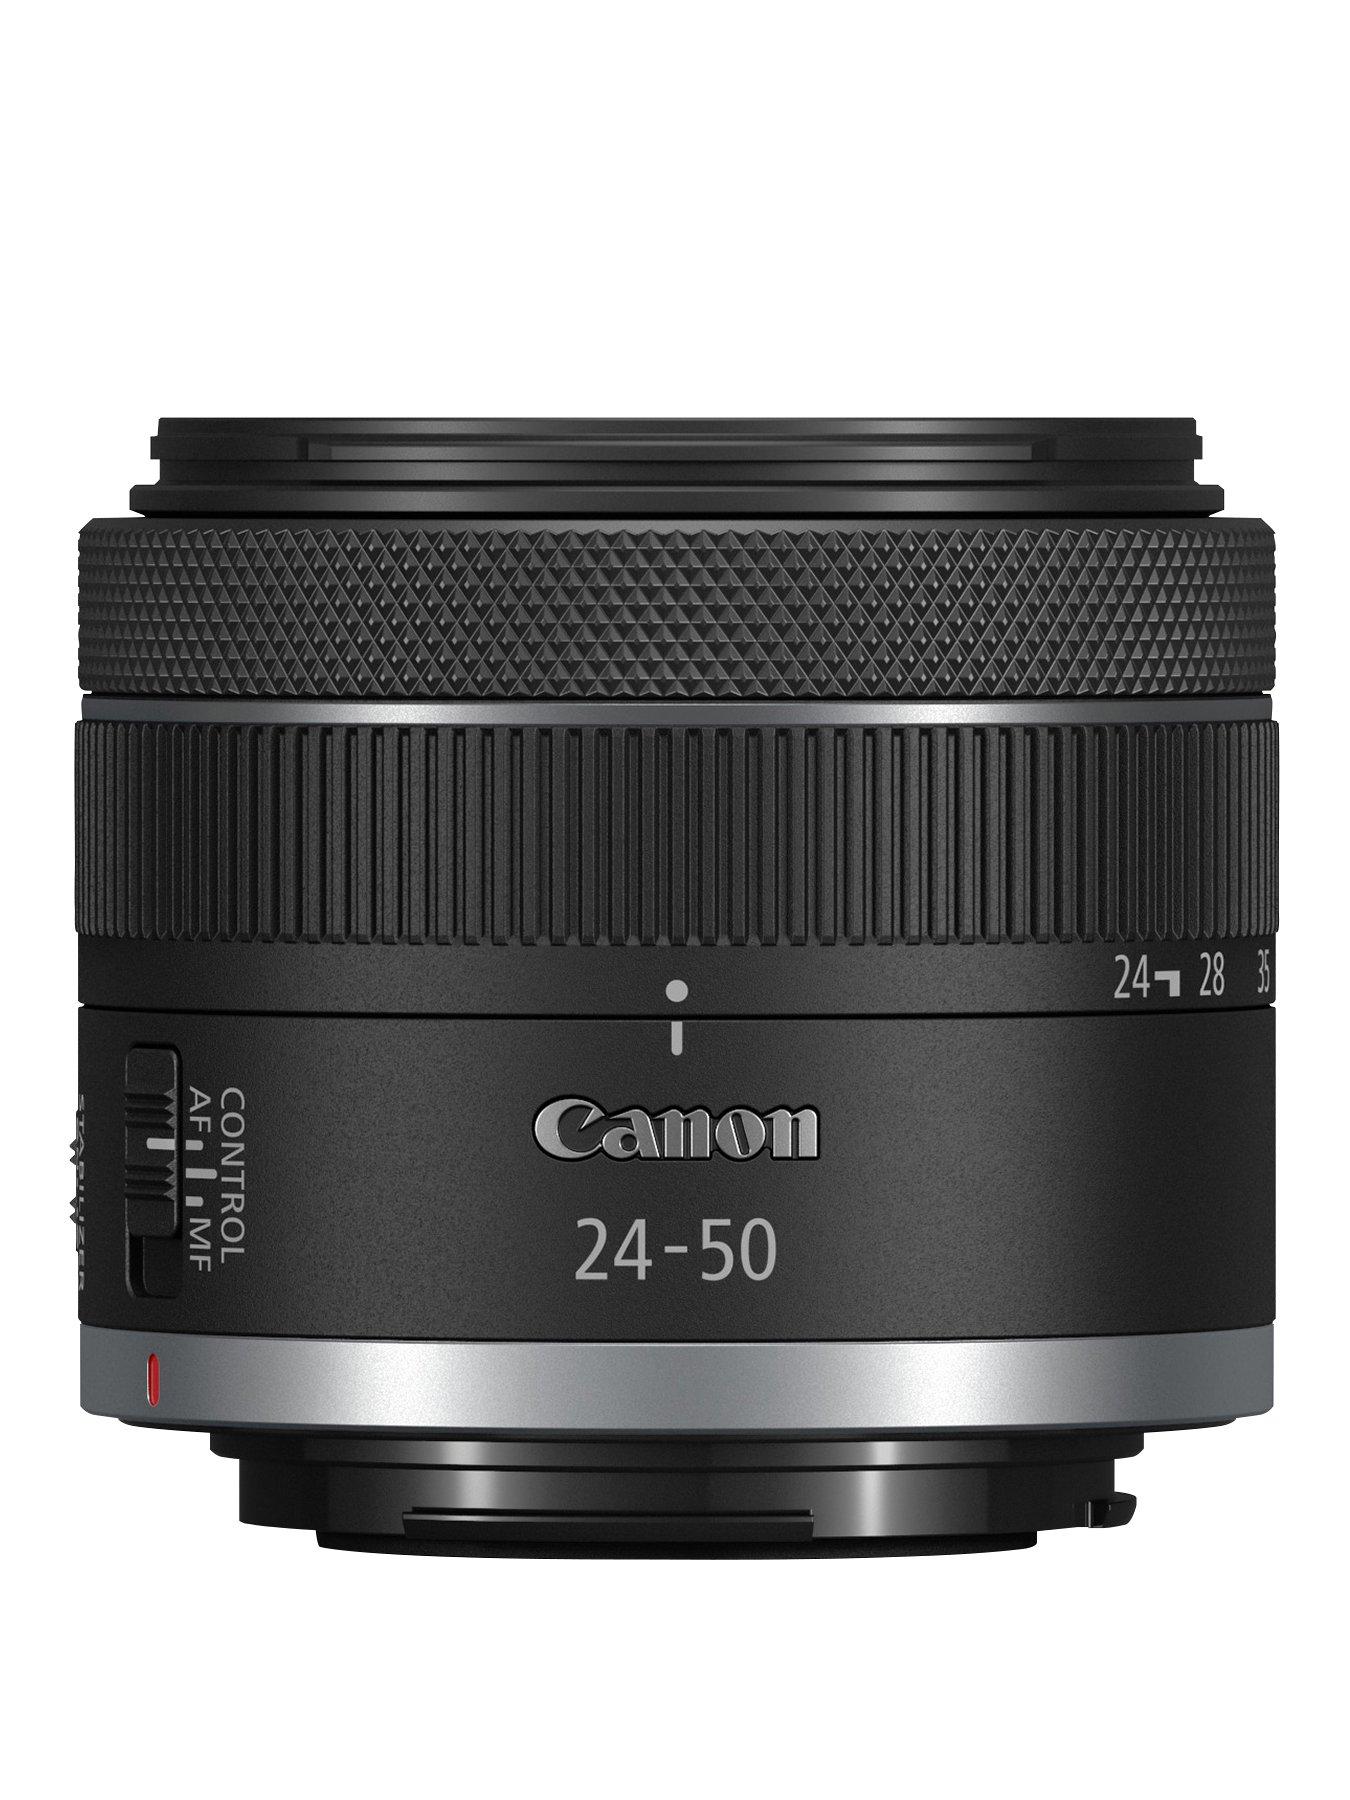 Canon Canon RF 24-50mm F4.5-6.3 IS STM Lens - Black | Very ...